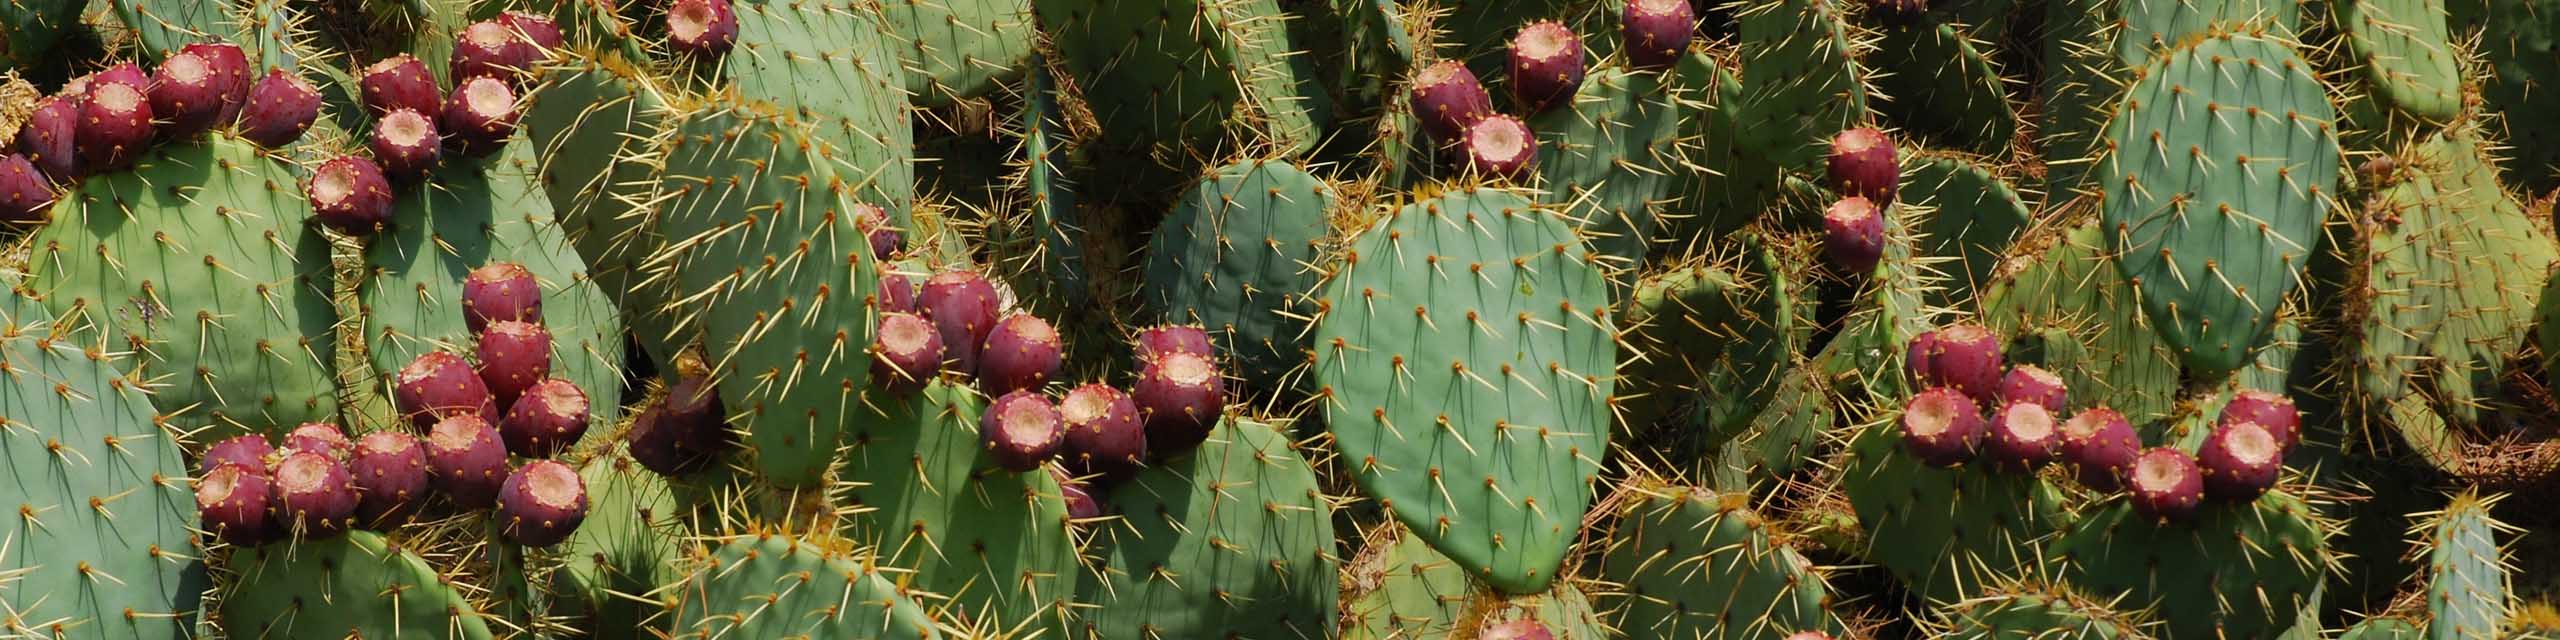 A field full of prickly pear cacti with purple fruit.